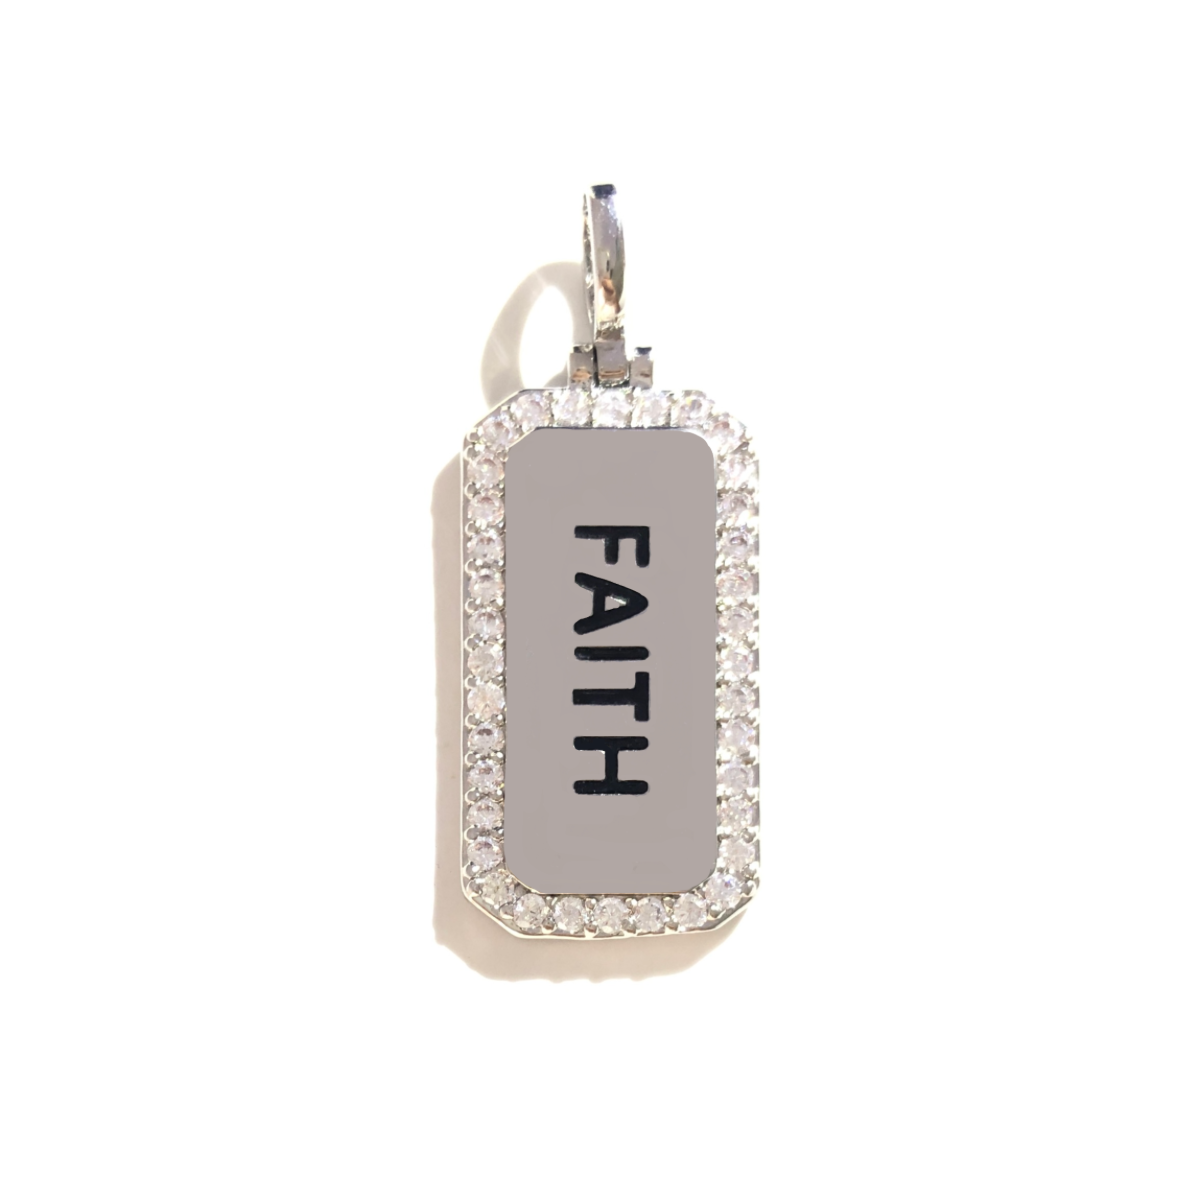 10pcs/lot 38*15mm CZ Paved Faith Word Tags Charms Pendants Silver CZ Paved Charms Christian Quotes New Charms Arrivals Word Tags Charms Beads Beyond